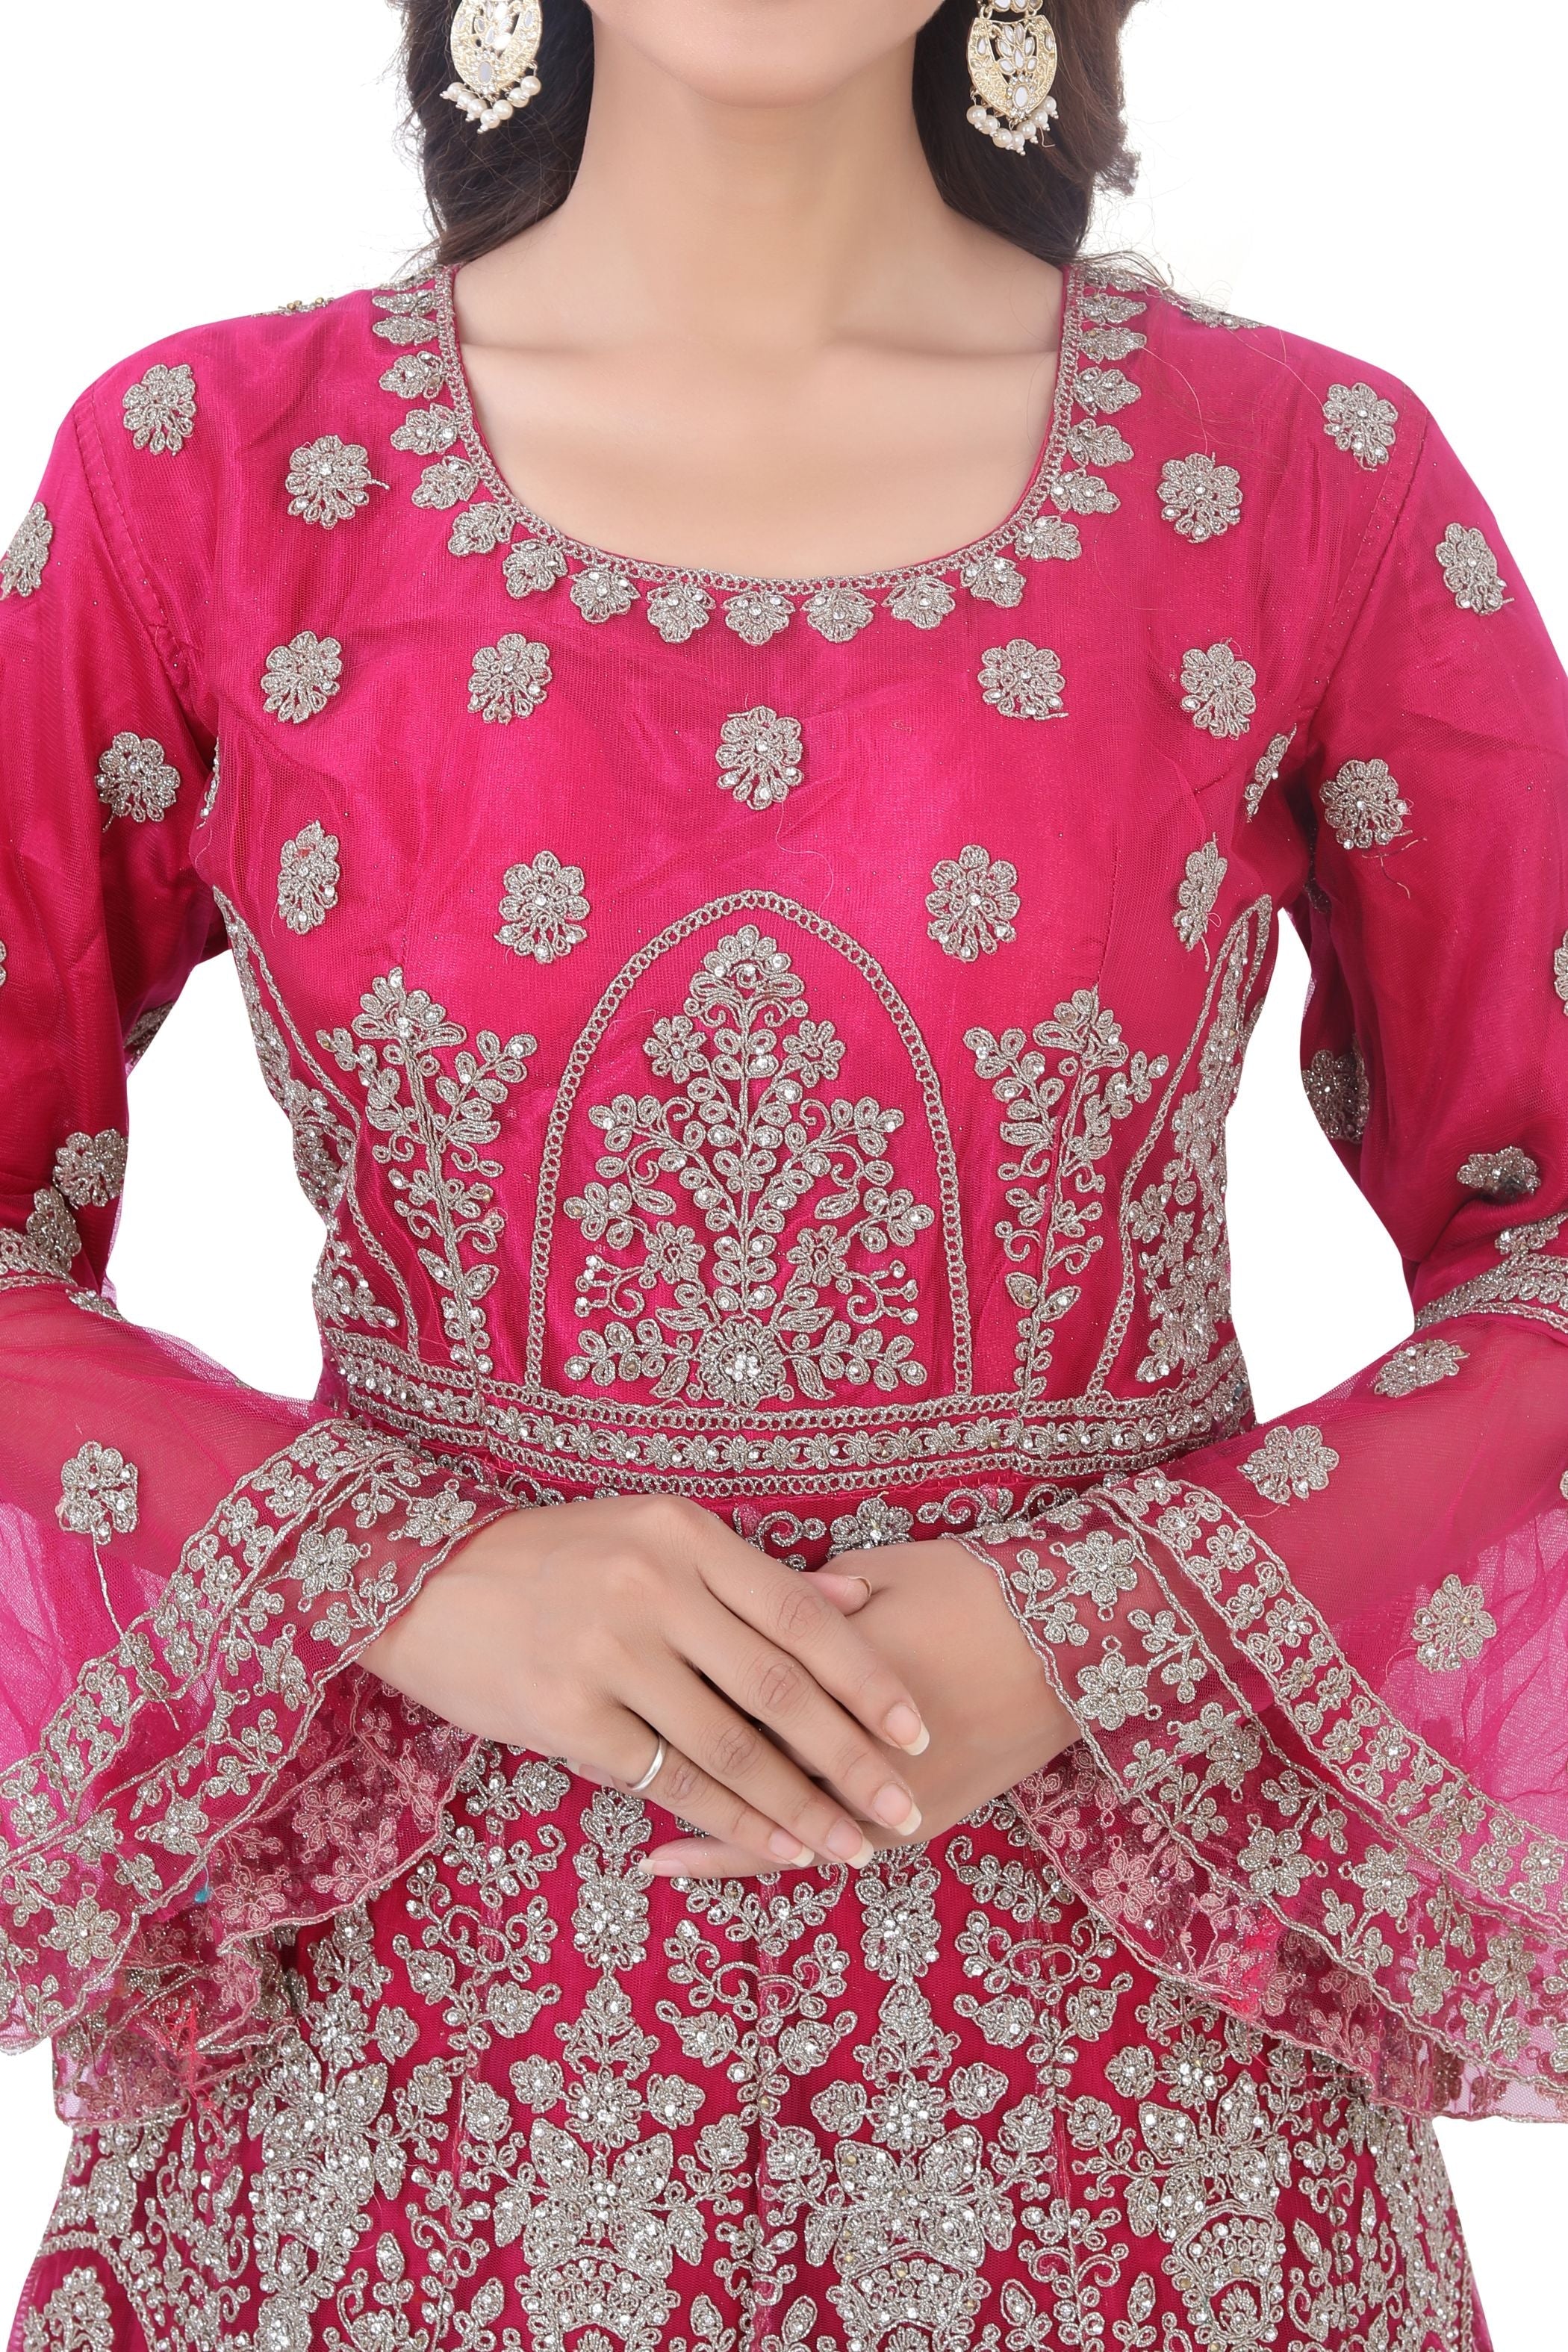 Heavy Embroidered Short Anarkali with Pencil Pant  in Hot Pink Colour D.No.2